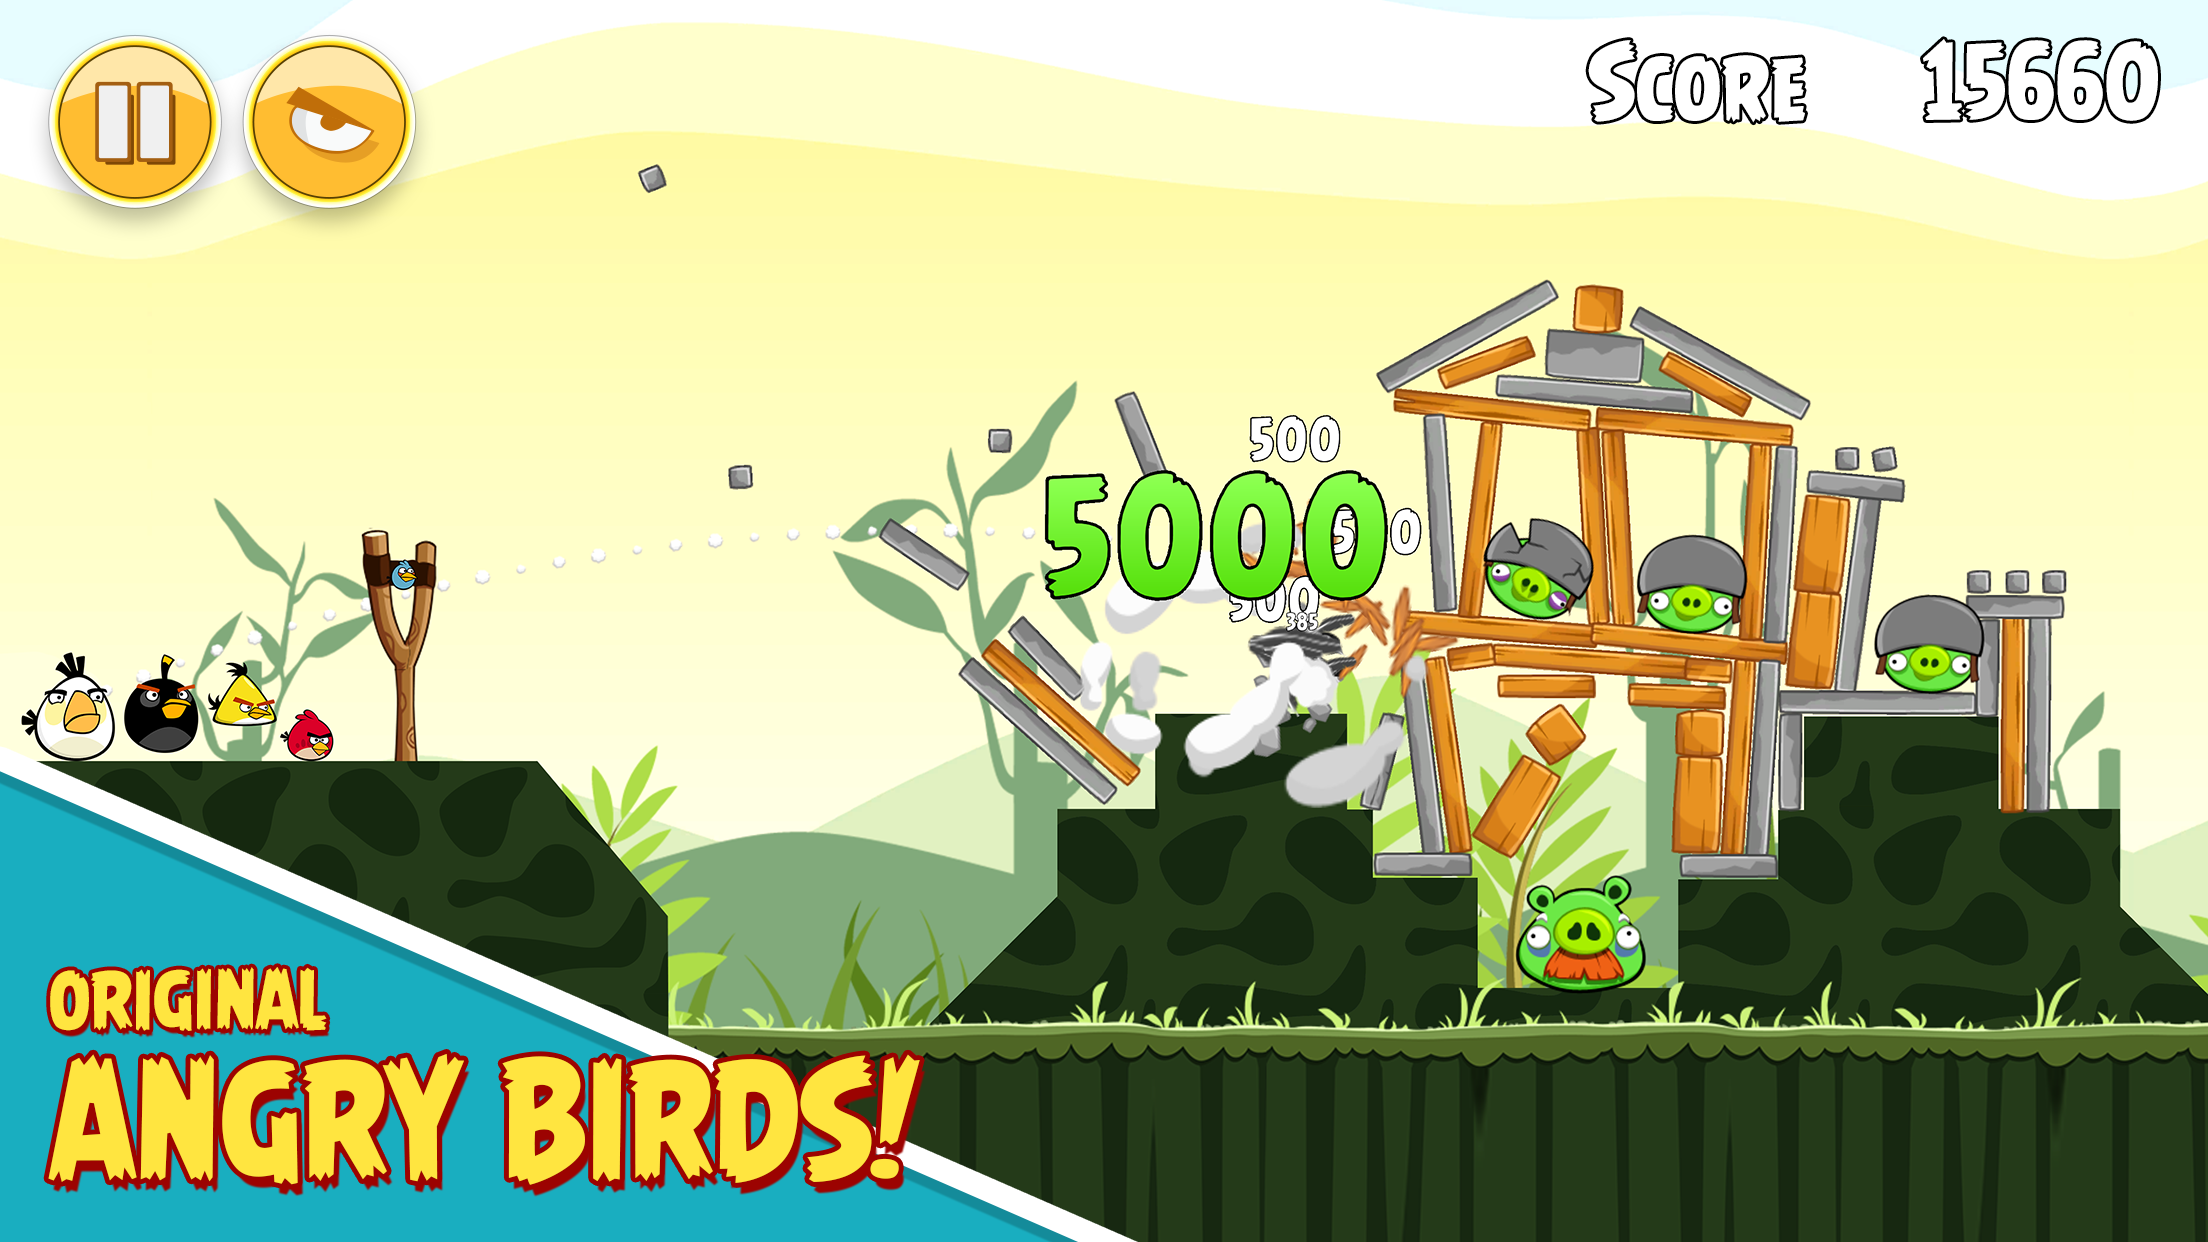 Angry Birds best games of all time roundup (1)